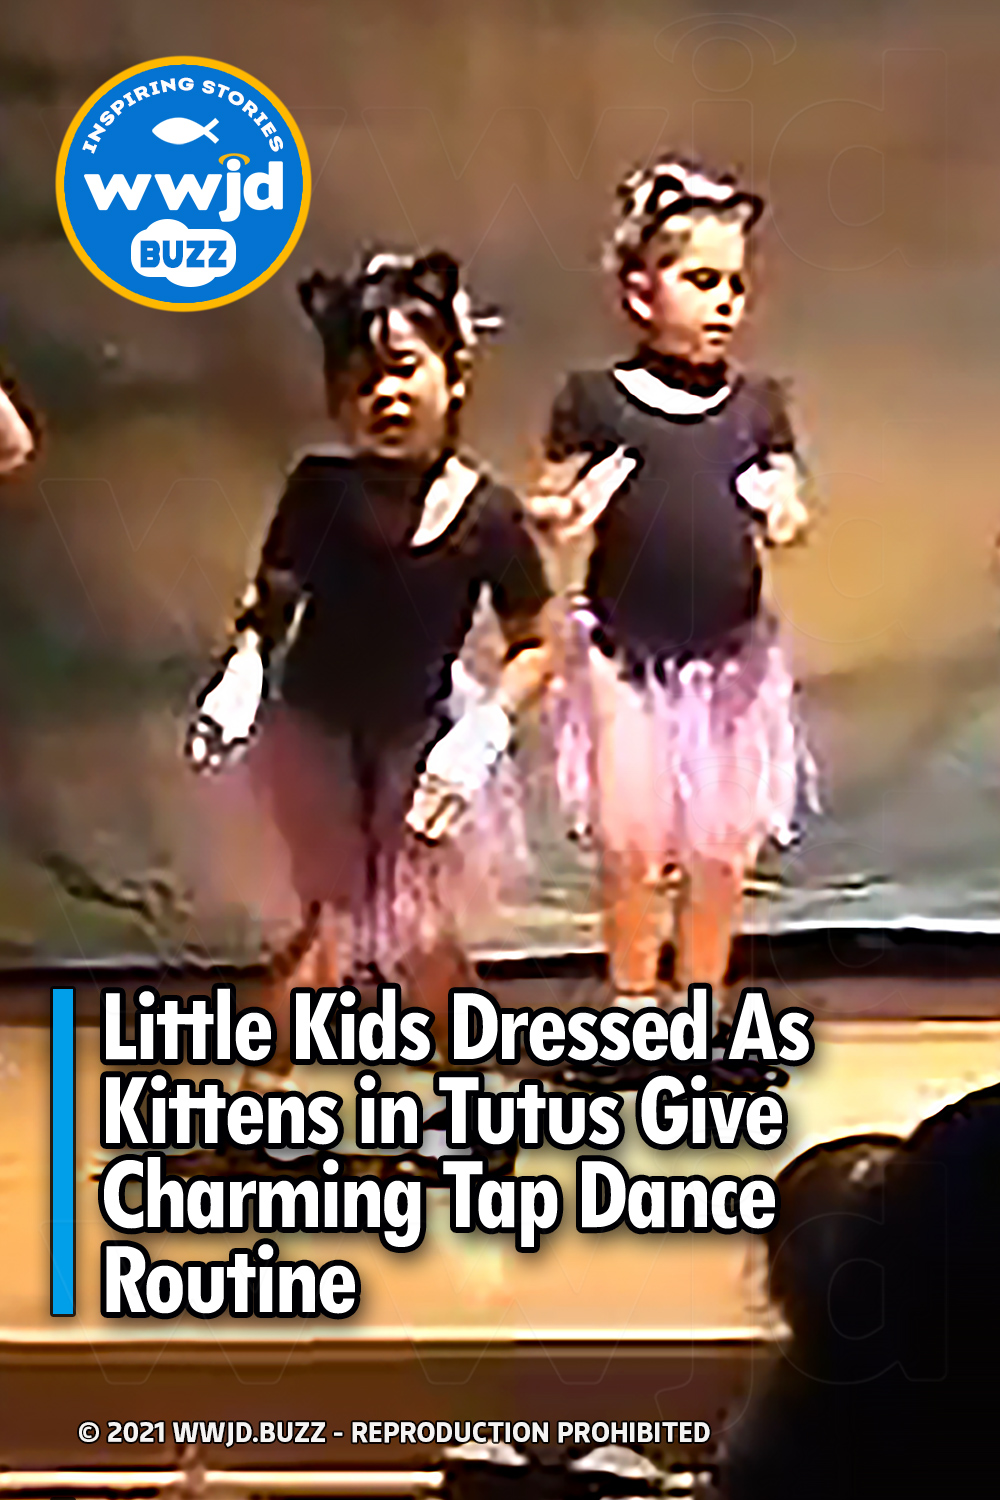 Little Kids Dressed As Kittens in Tutus Give Charming Tap Dance Routine